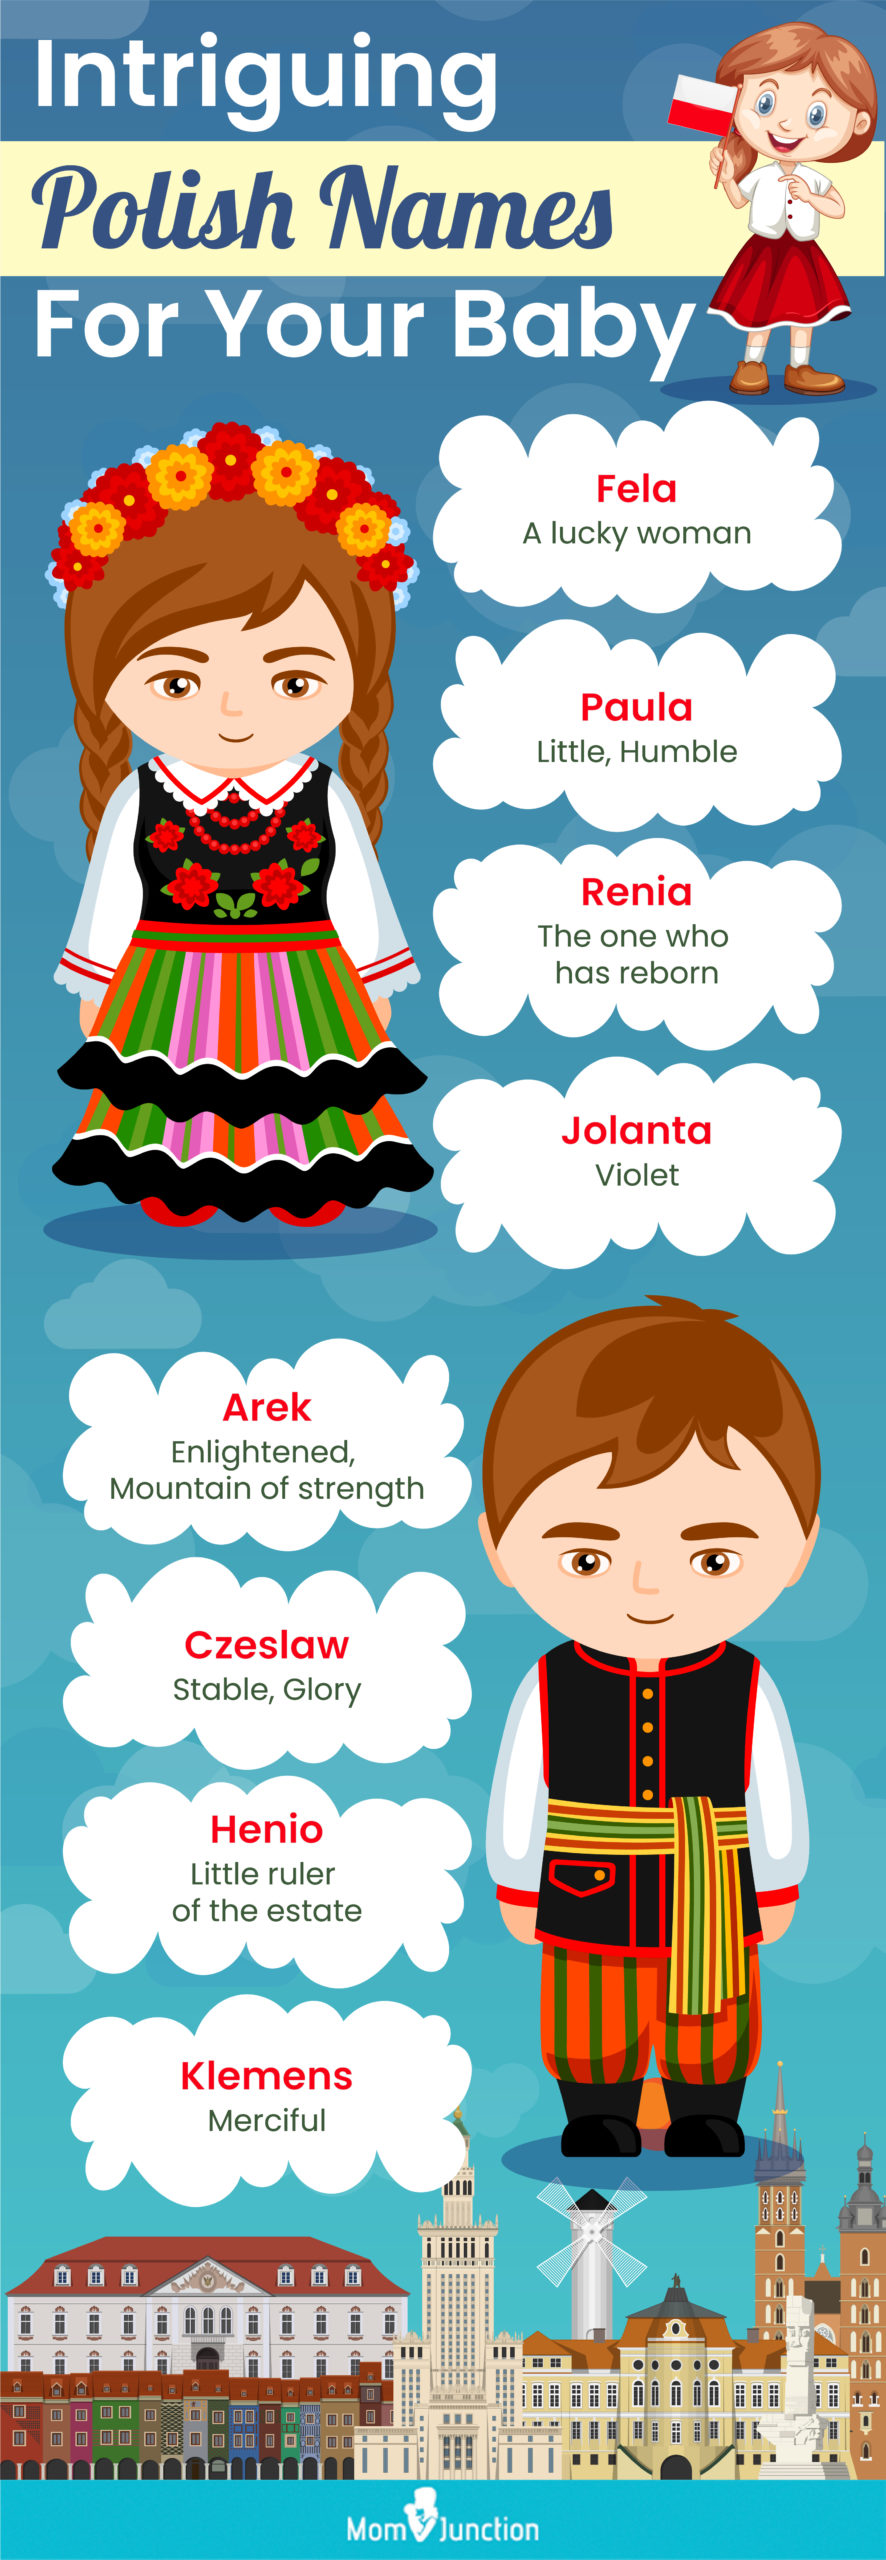 intriguing polish names for your baby (infographic)